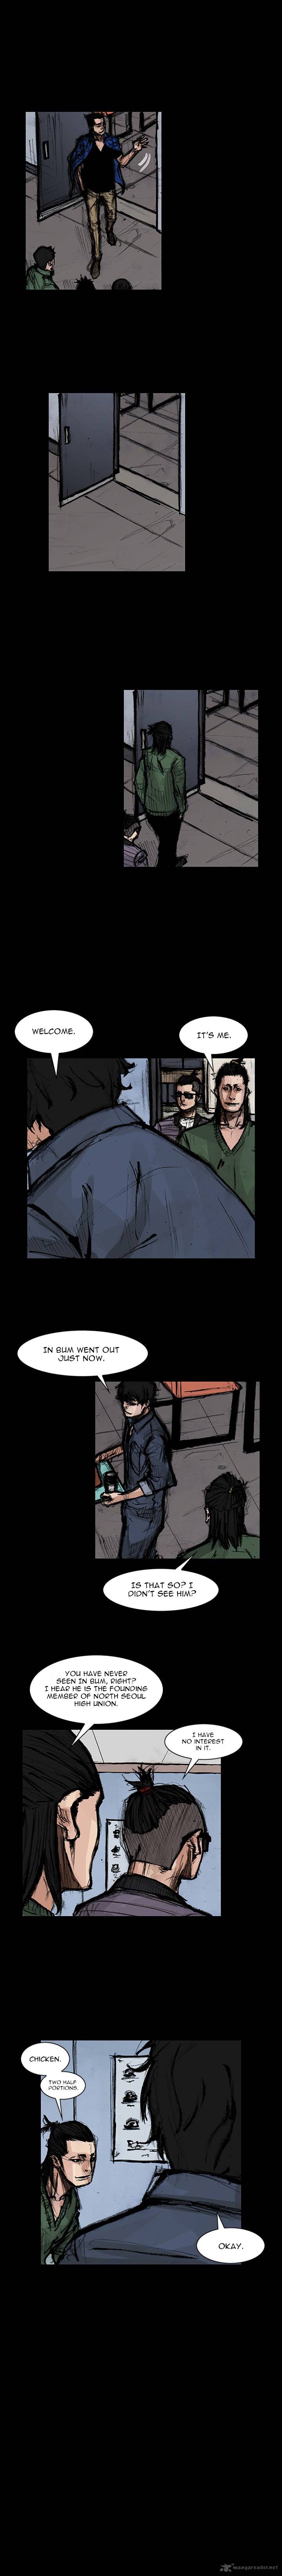 Dokgo 2 Chapter 4 Page 5